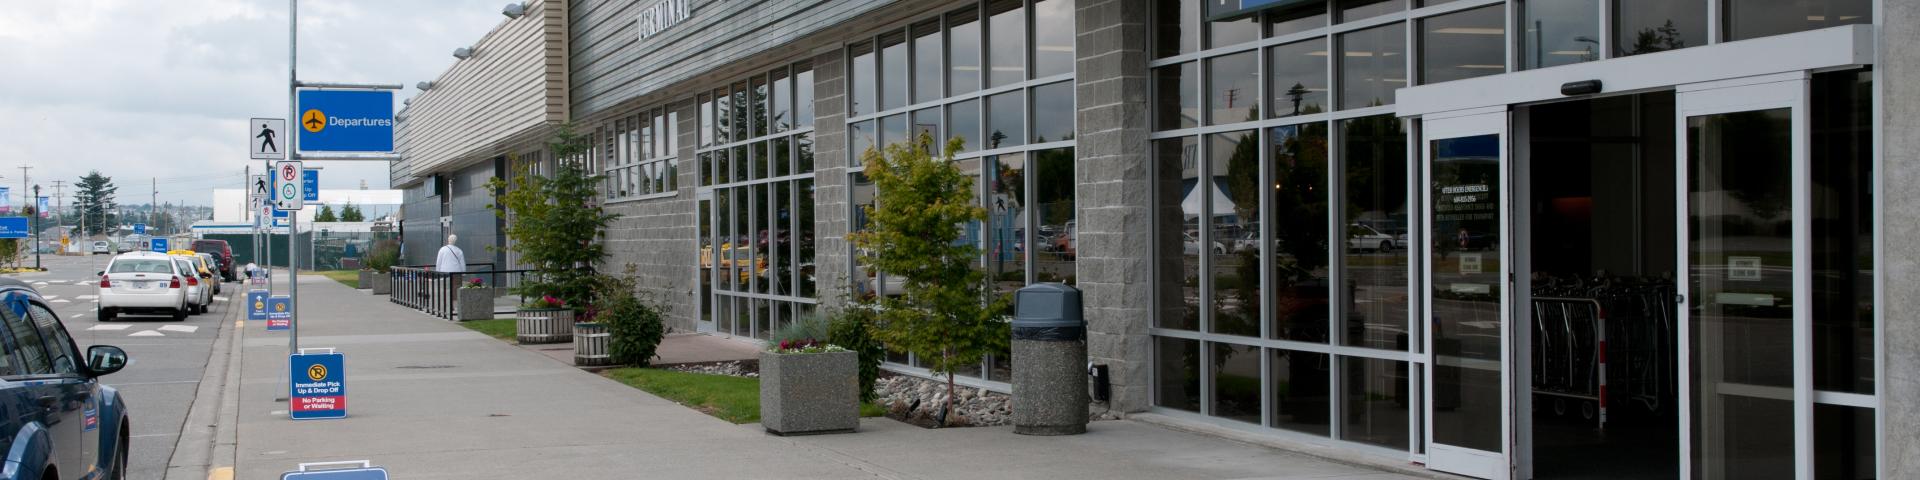 Image of Abbotsford airport entrance